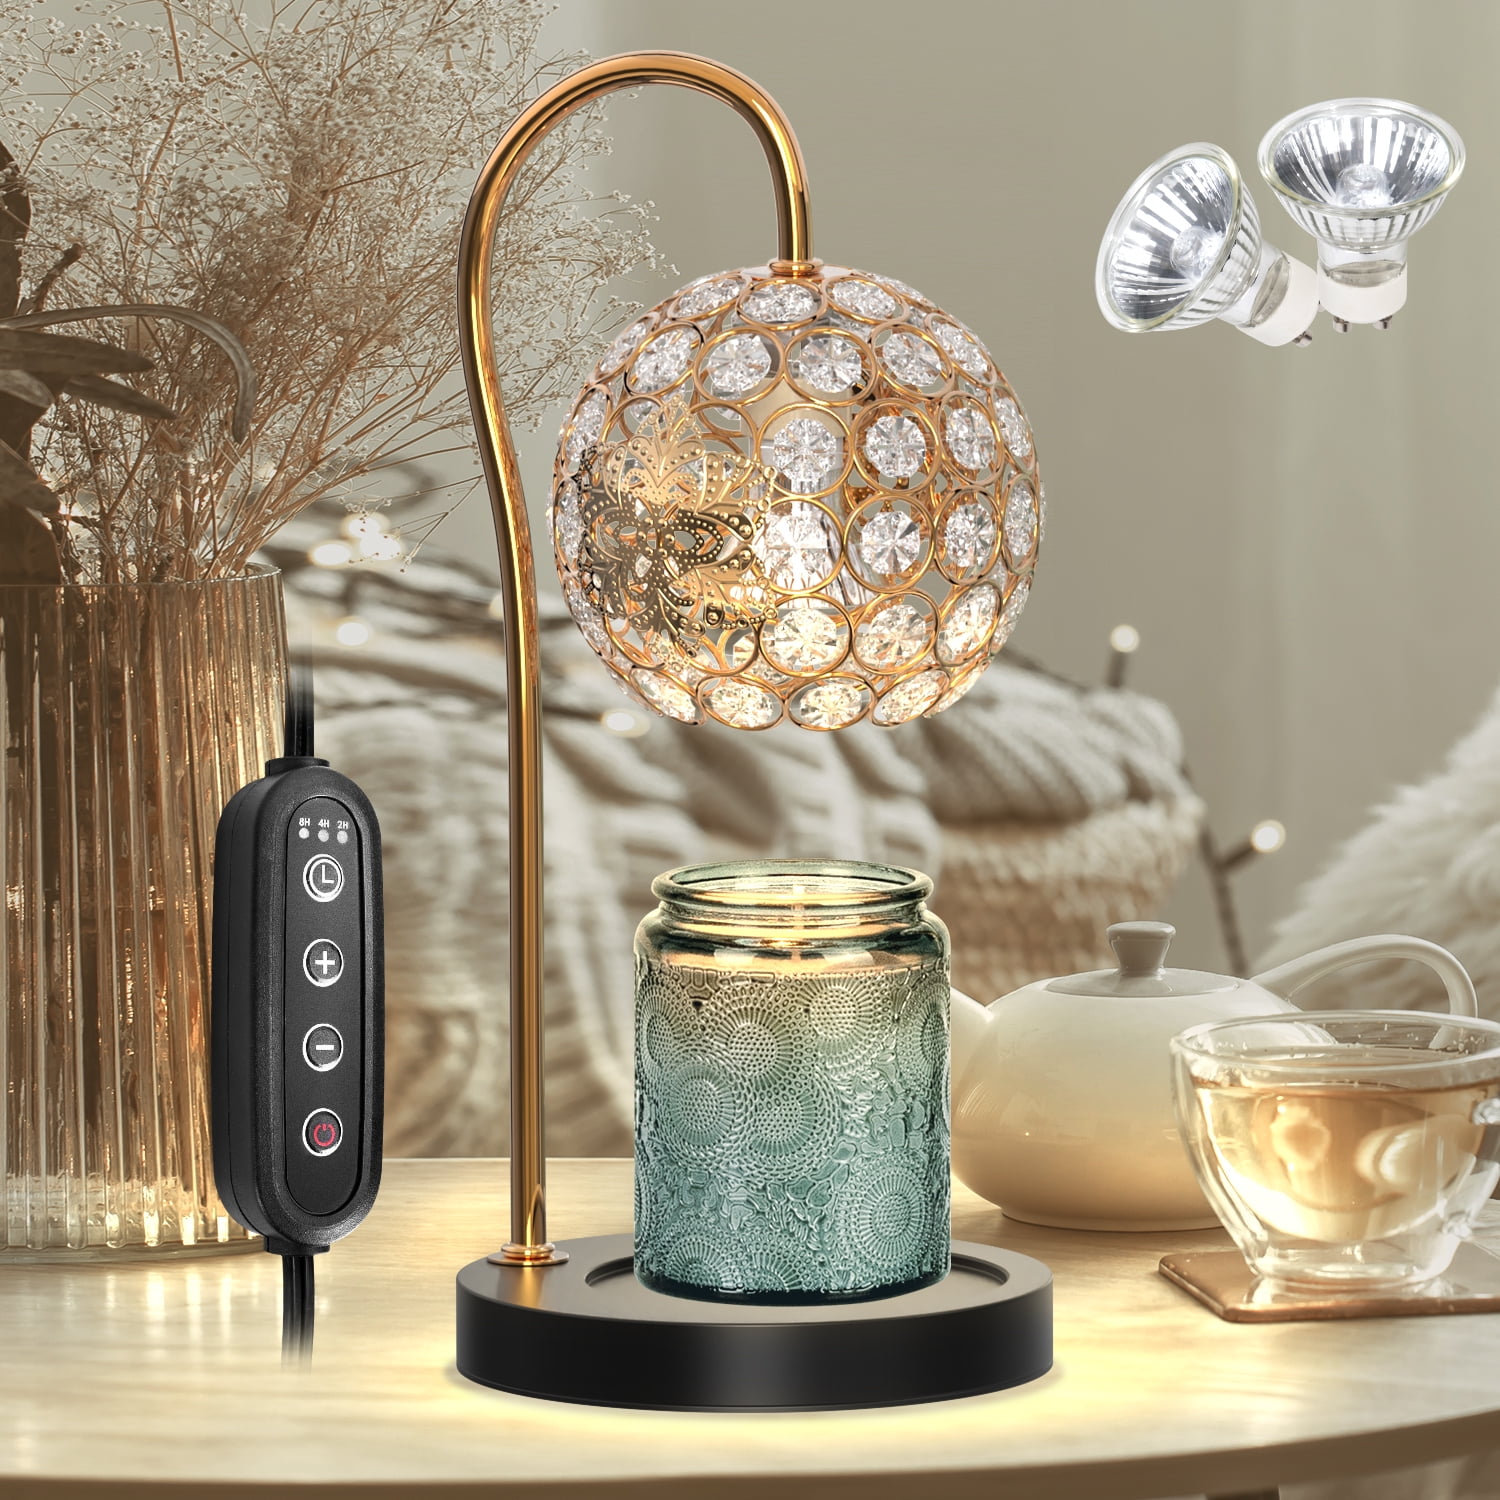 MINGPINHUIUS Candle Warmer Lamp with 2 Bulbs, Dimmable Metal Table Candle  Lamp with Timer, Electric Melt Wax Crystal Lamp for Scented Jar Candles